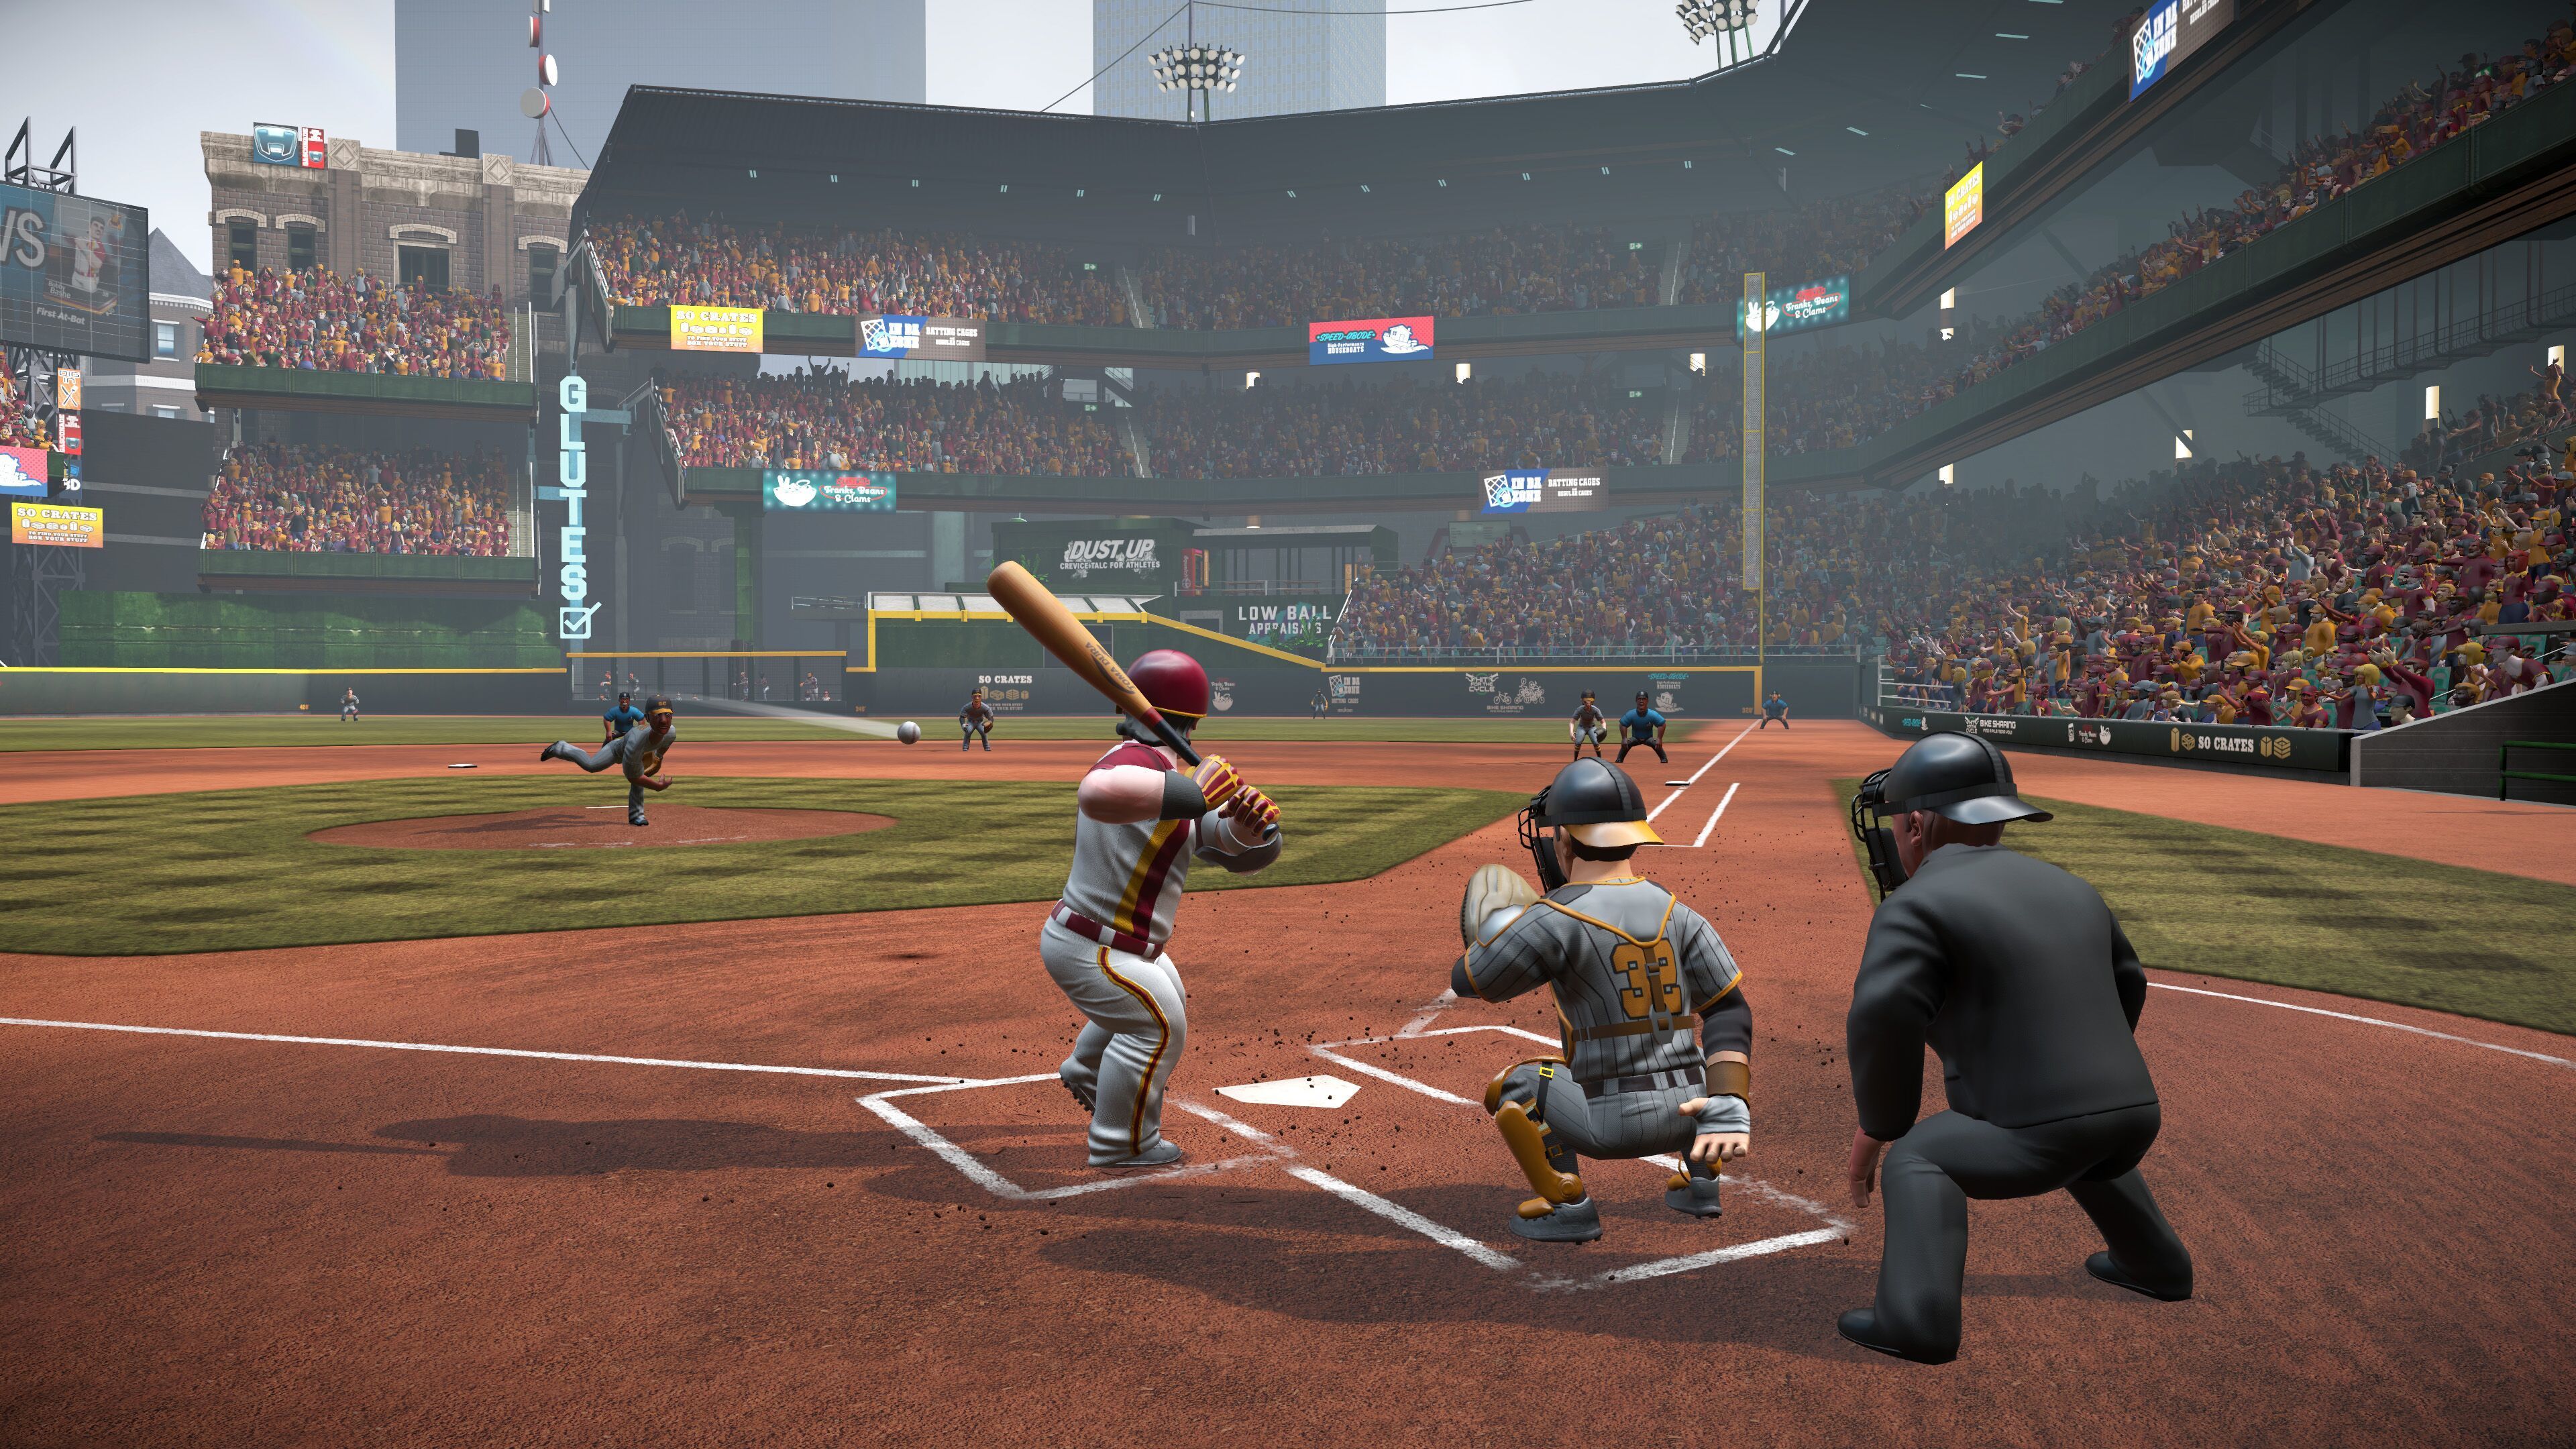 Super Mega Baseball 3 Is Available Now, And Its Generous Demo Lets You Play Online